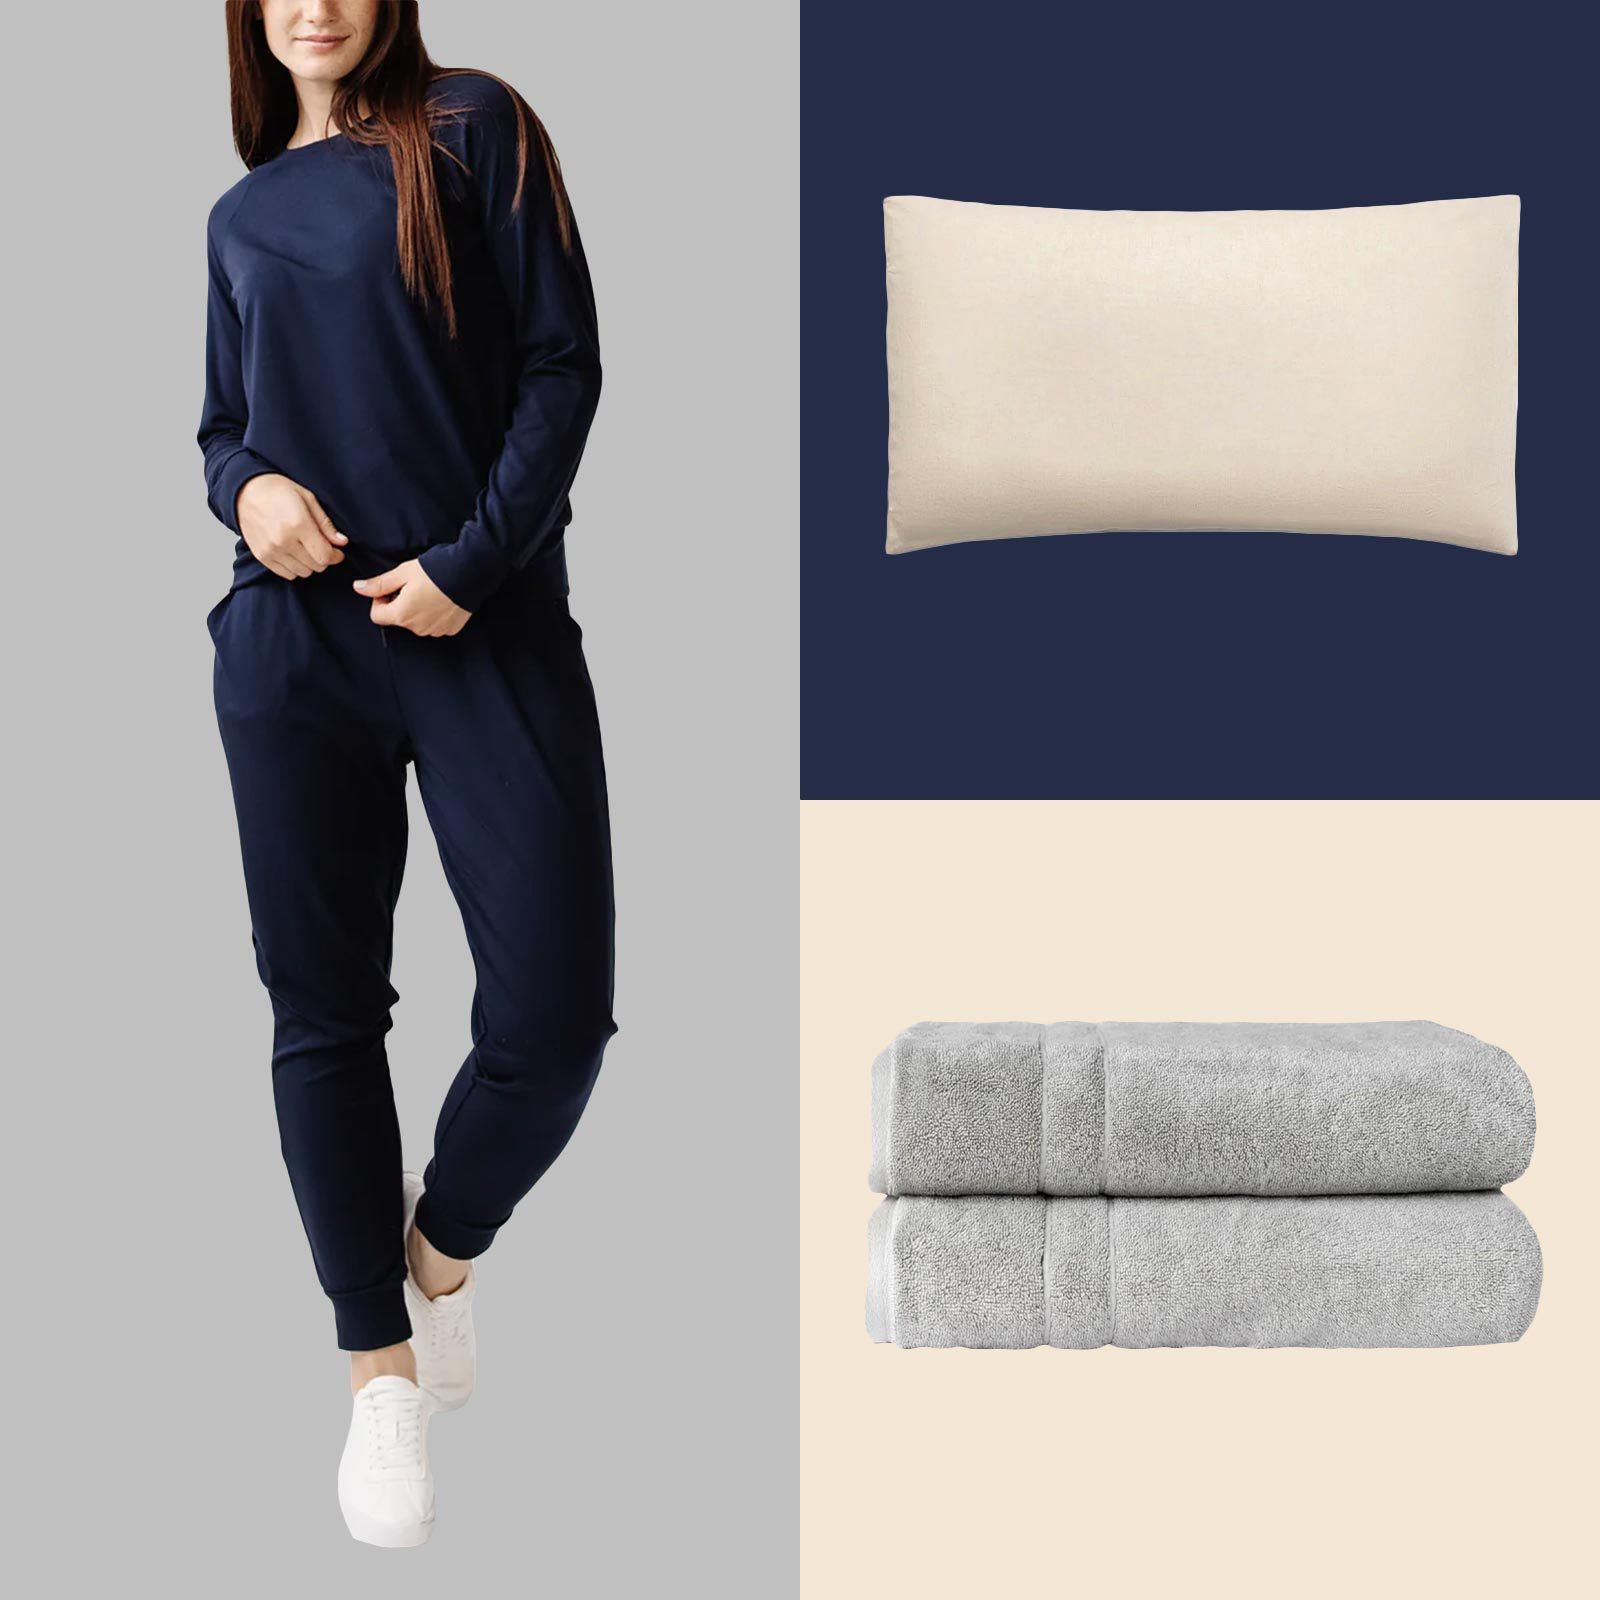 https://www.rd.com/wp-content/uploads/2023/04/RD-ecomm-FT-Our-Favorite-Loungewear-and-Bedding-via-cozyearth.com_.jpg